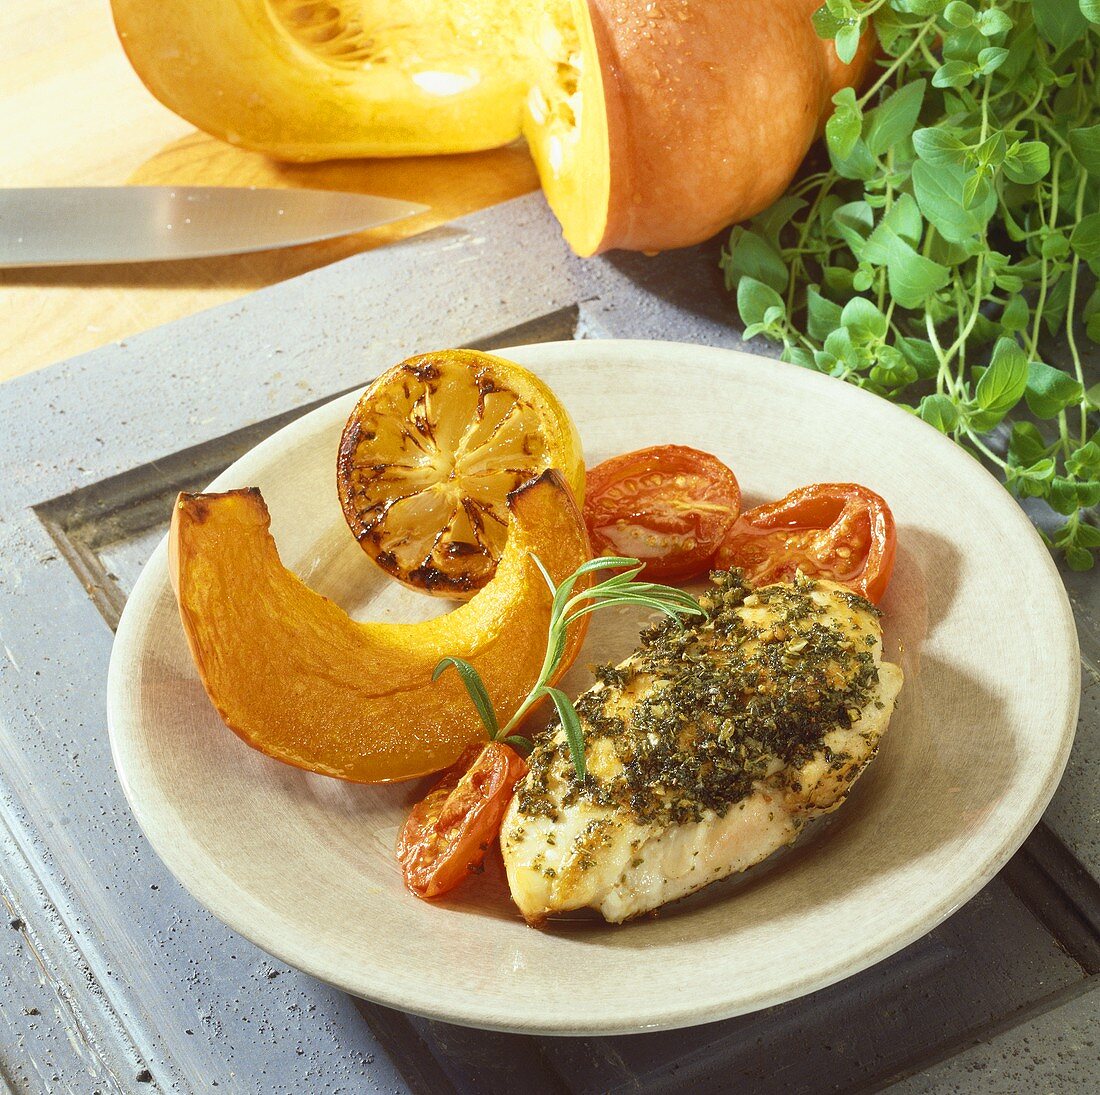 Chicken breast with herb crust and baked pumpkin